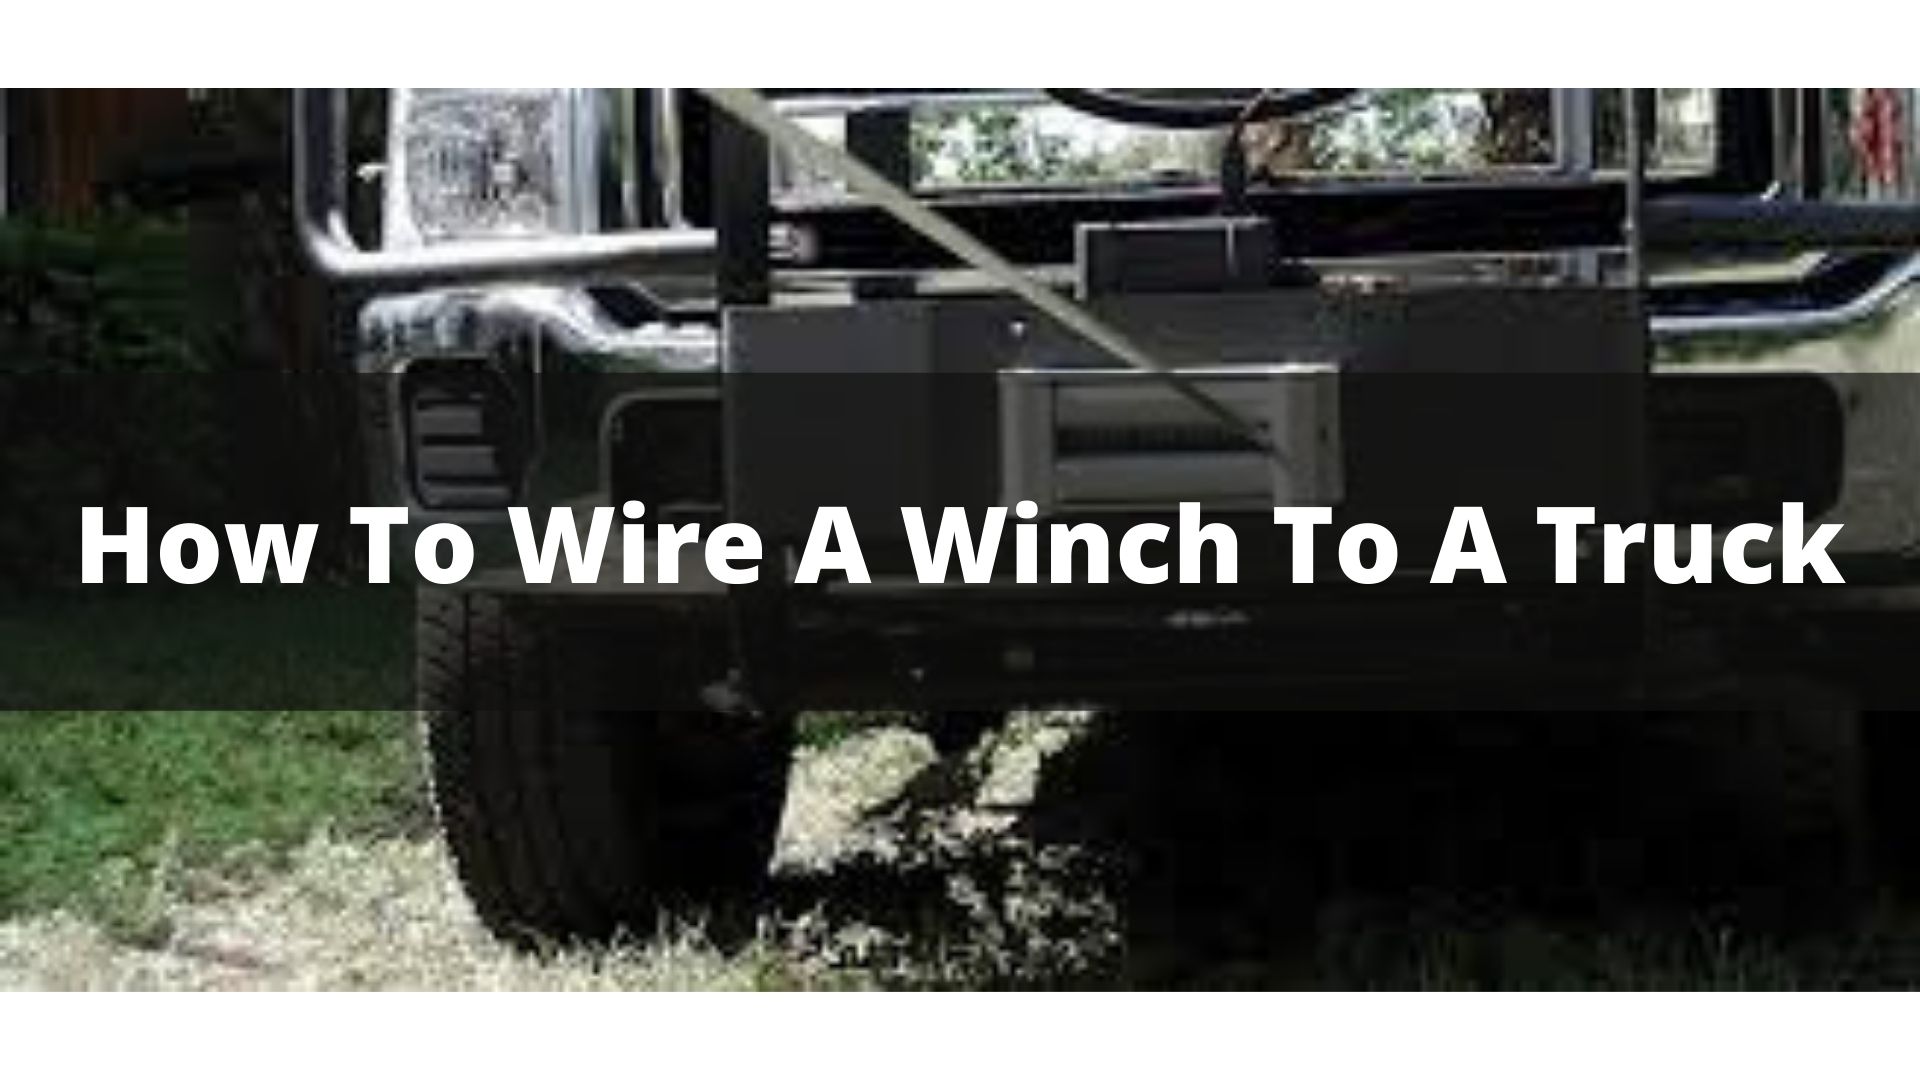 How To Wire A Winch To A Truck